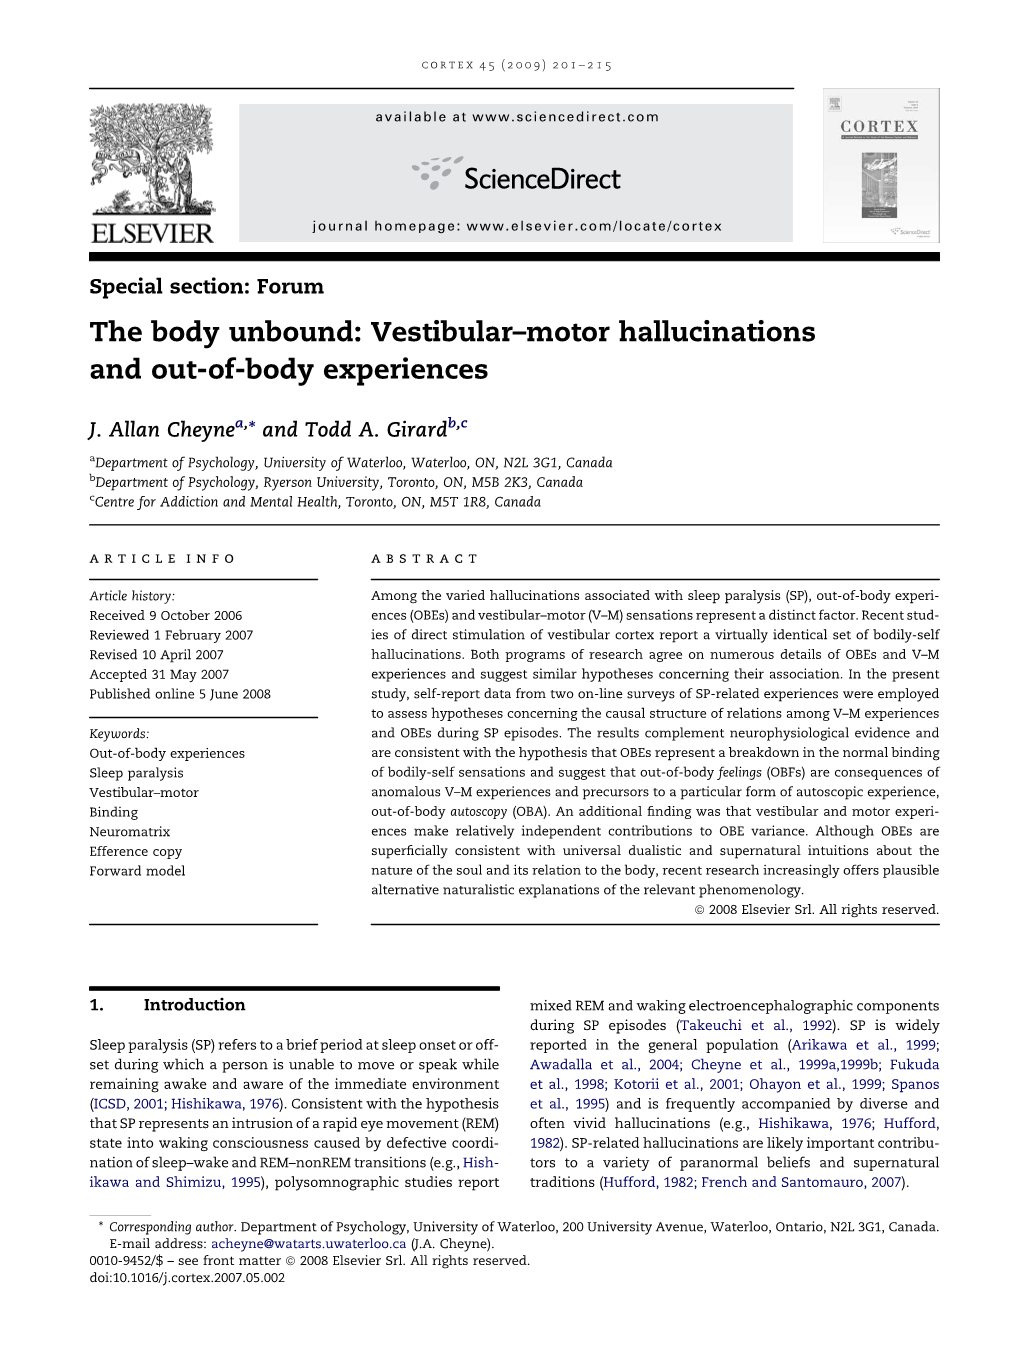 Vestibular-Motor Hallucinations and Out-Of-Body Experiences